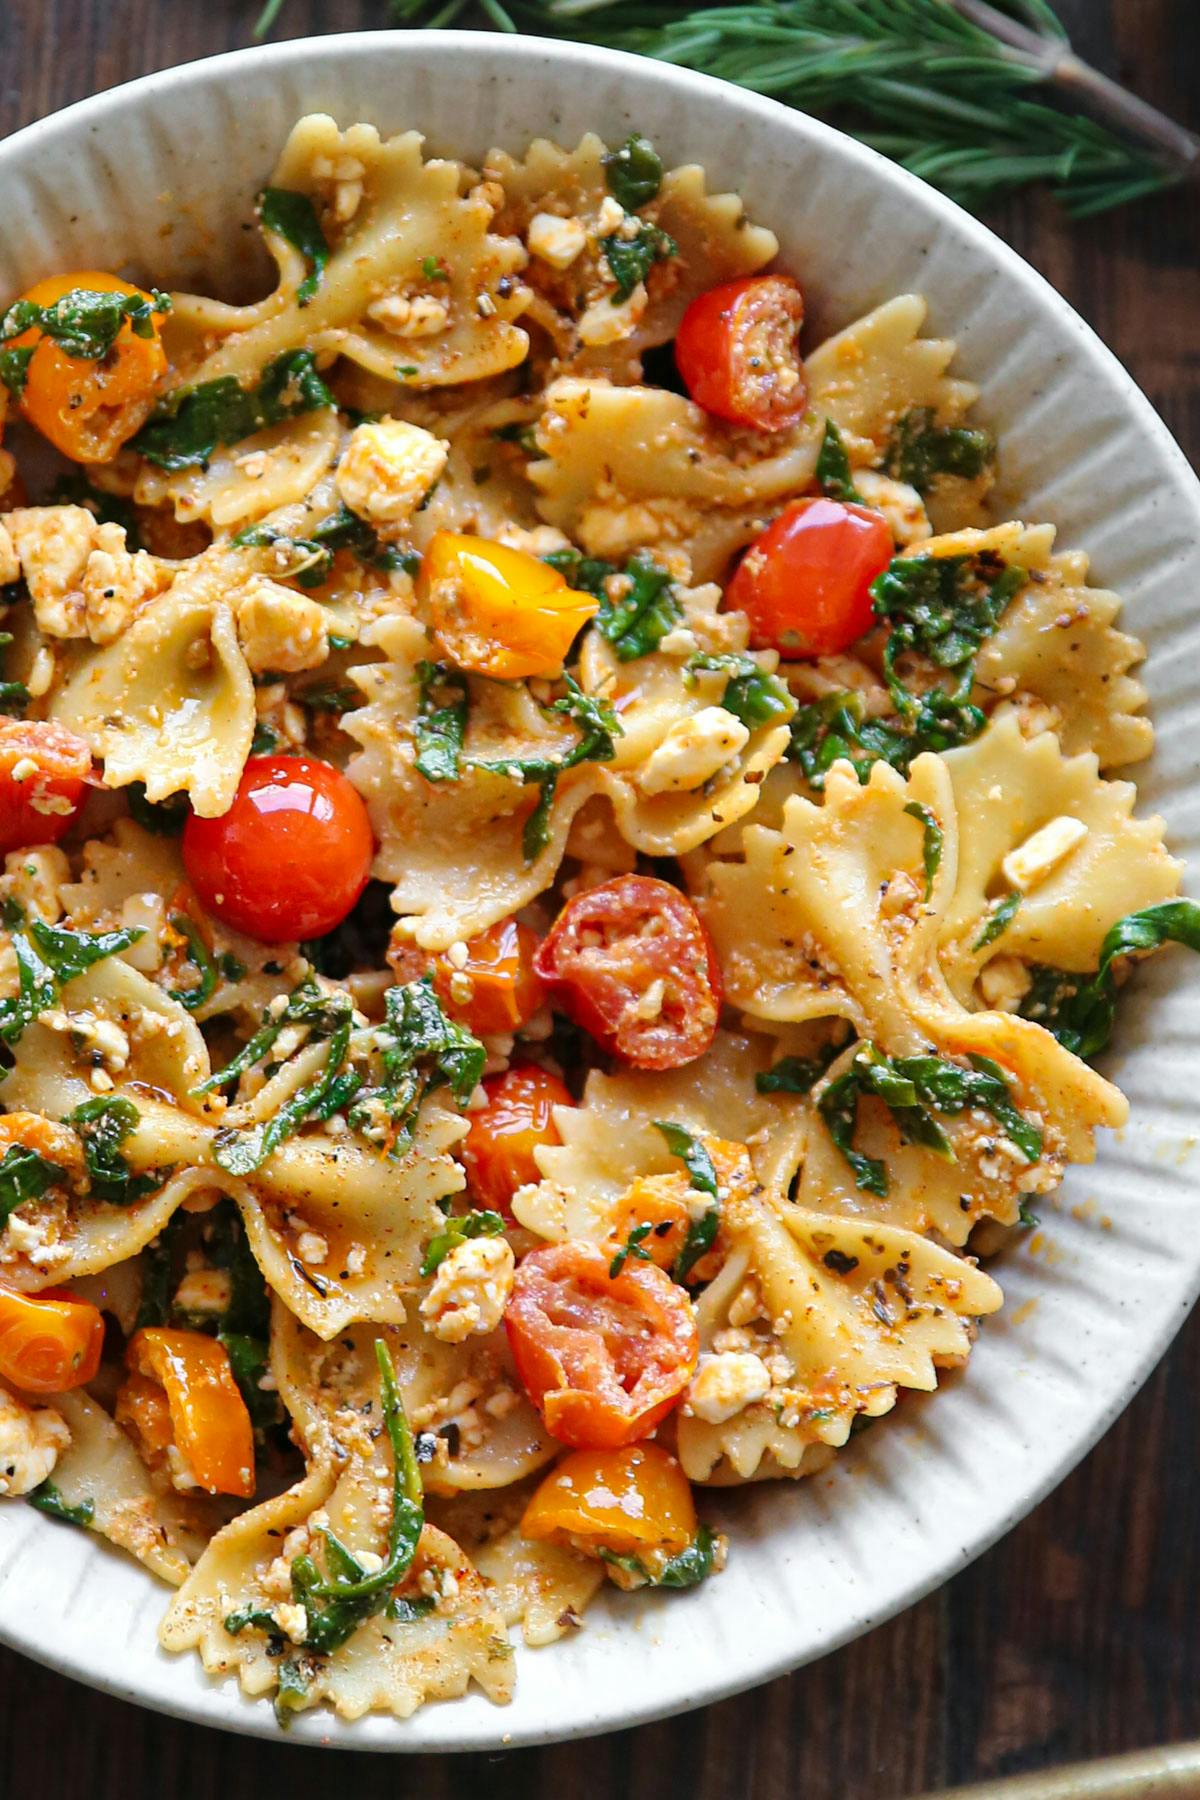 Feta Pasta with Cherry Tomatoes and Spinach